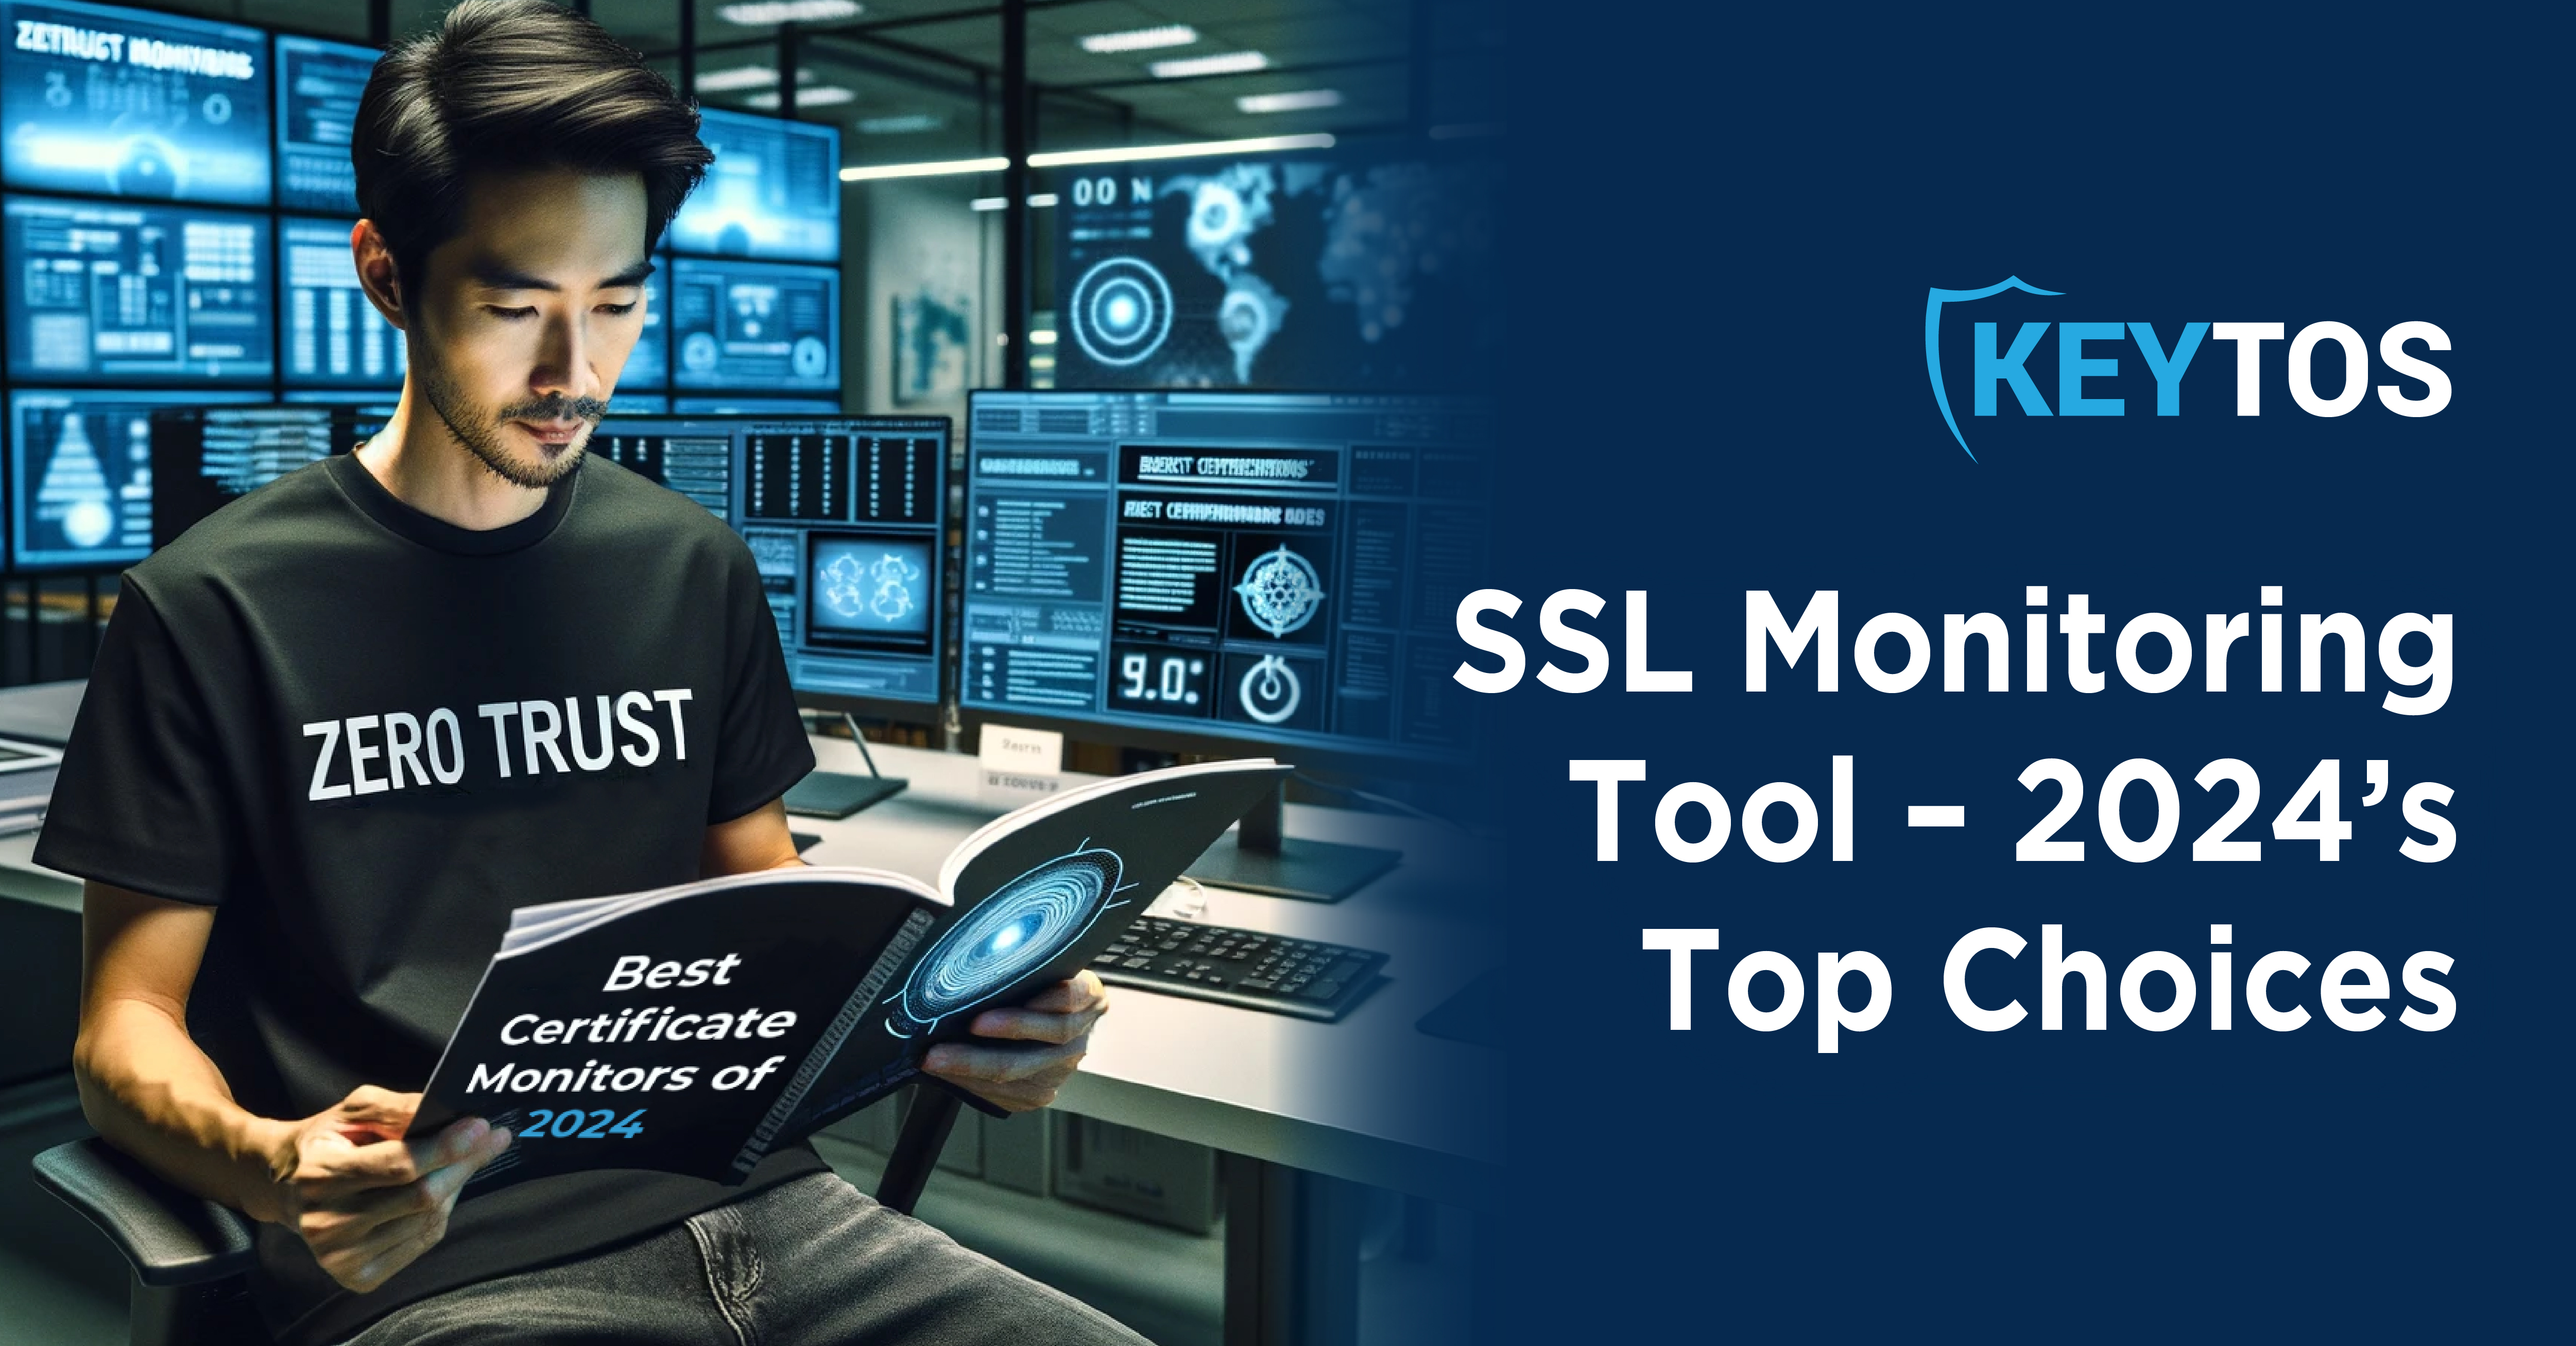 What are the Best SSL Monitoring Tools?